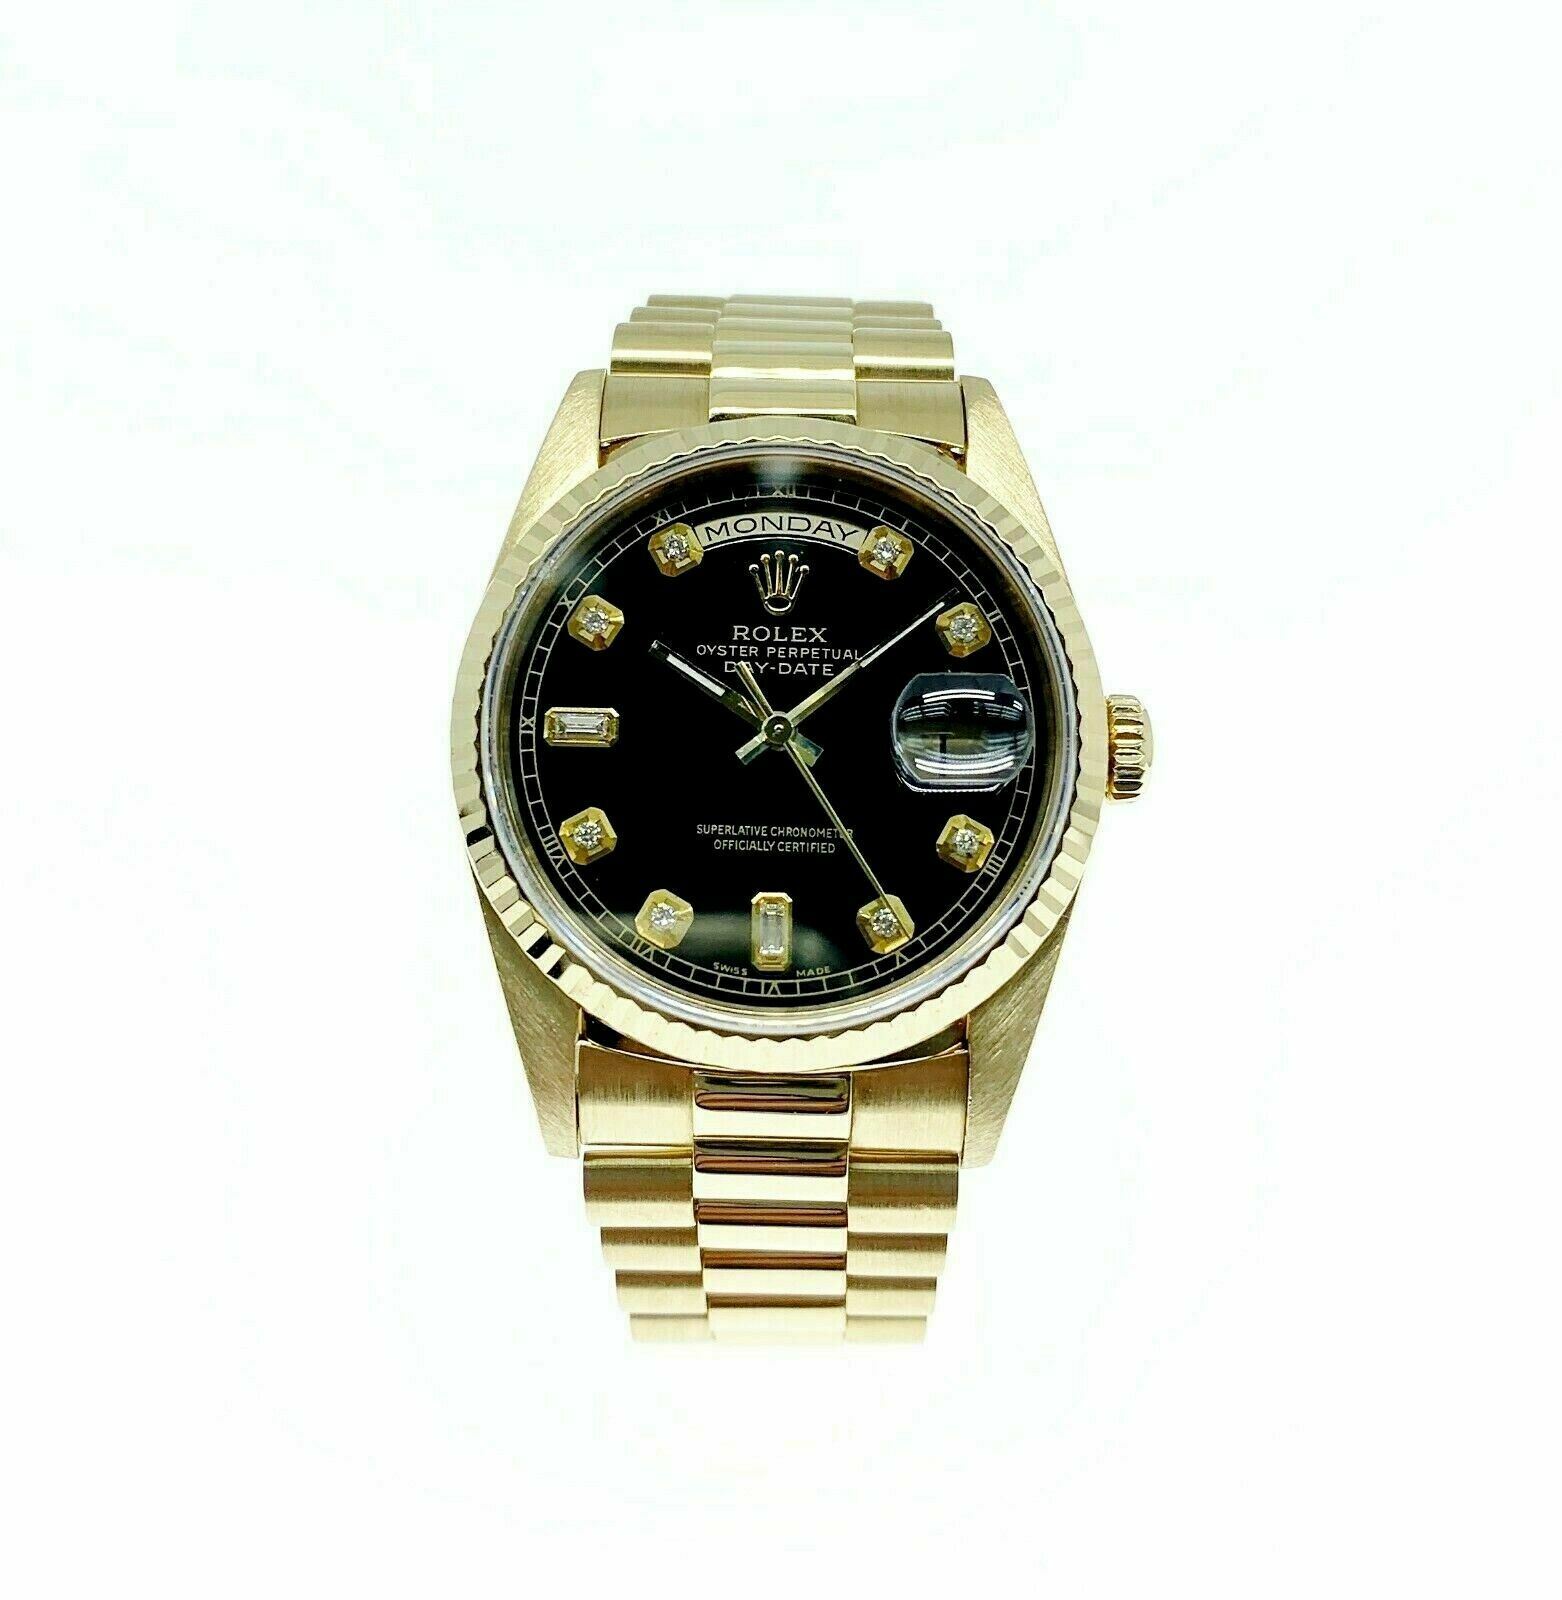 Rolex Day Date President 18K Yellow Gold 36mm Watch 18238 Double Quick Set 1990